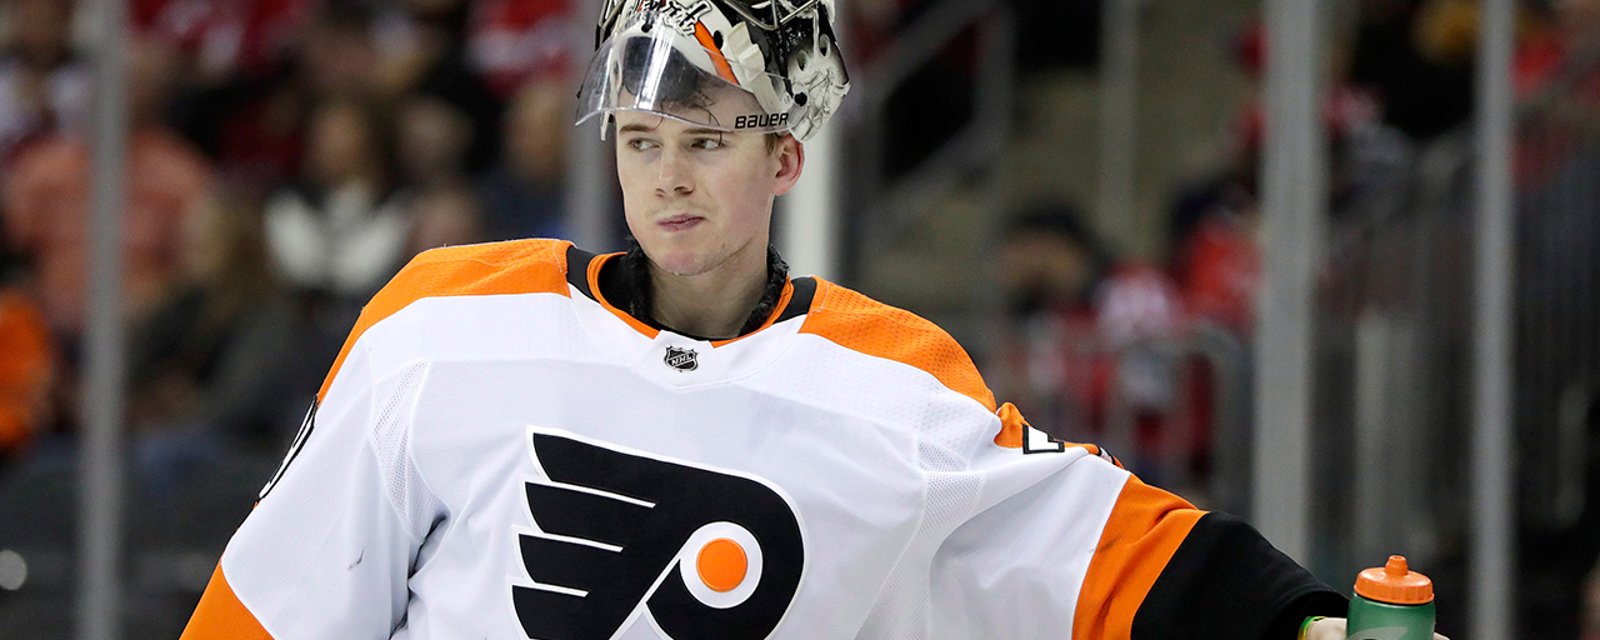 Latest details on Carter Hart targeted as potential acquisition by KHL club